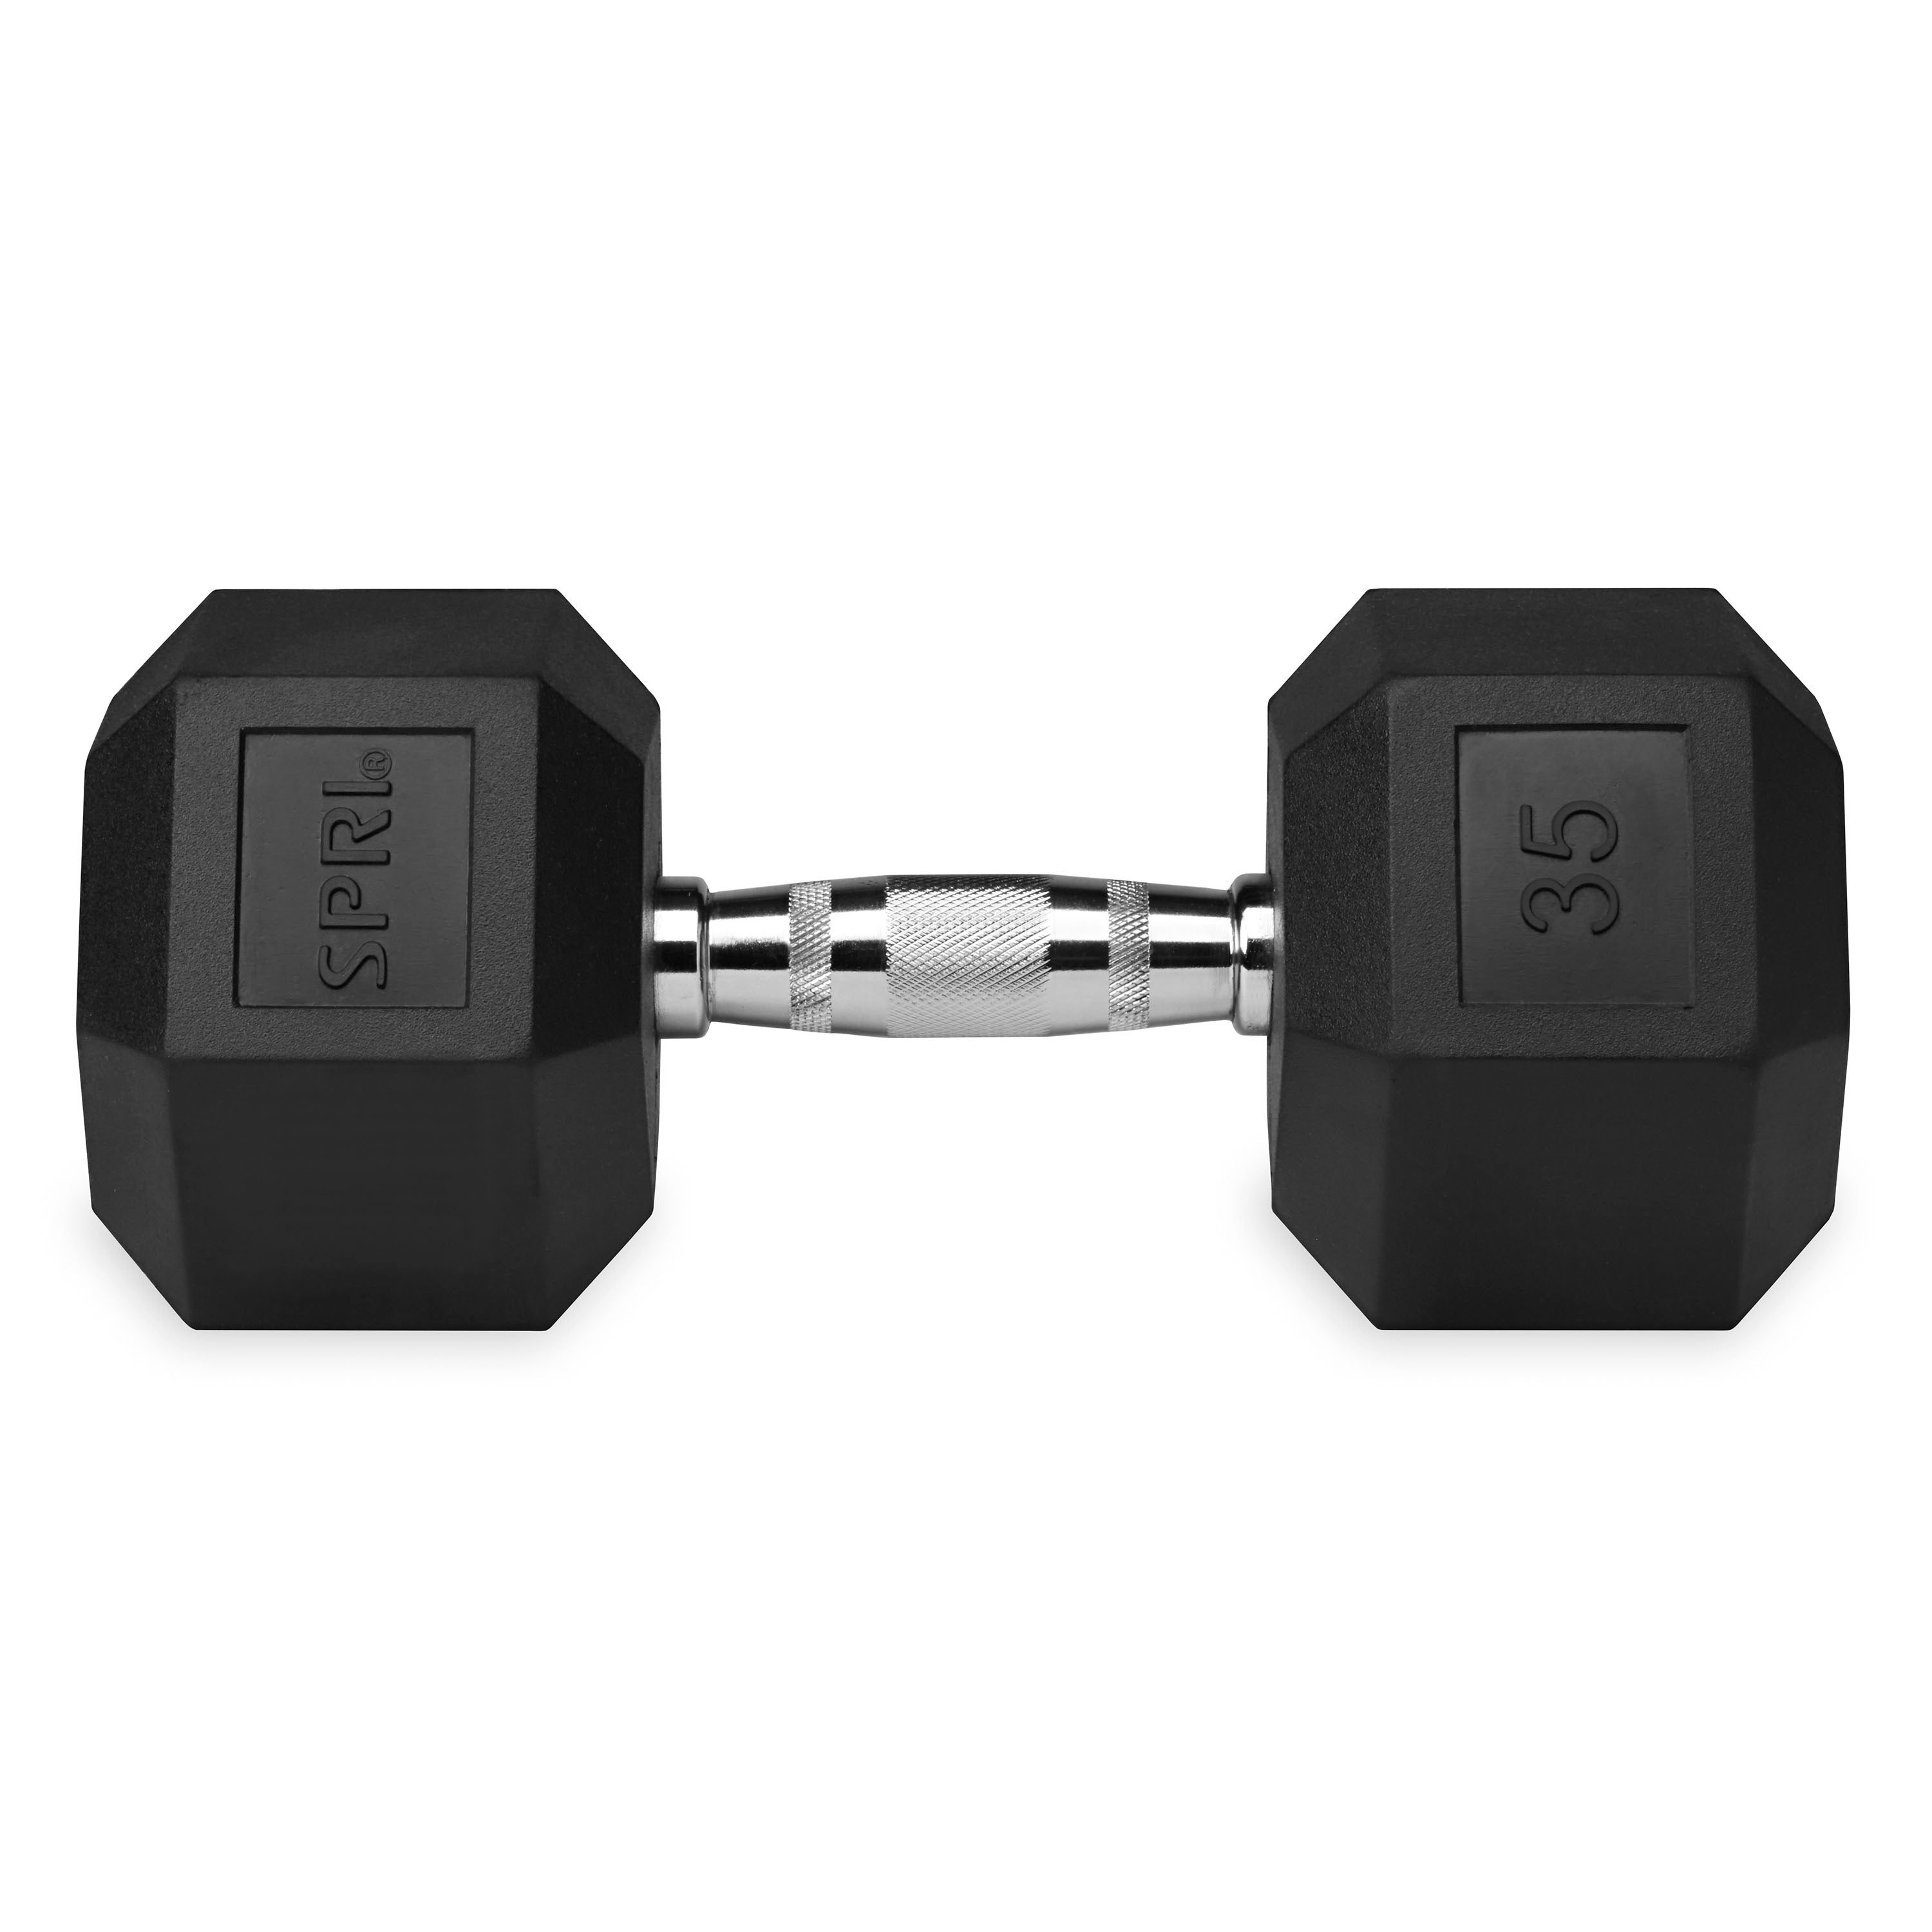 35lb six-sided single dumbbell side view